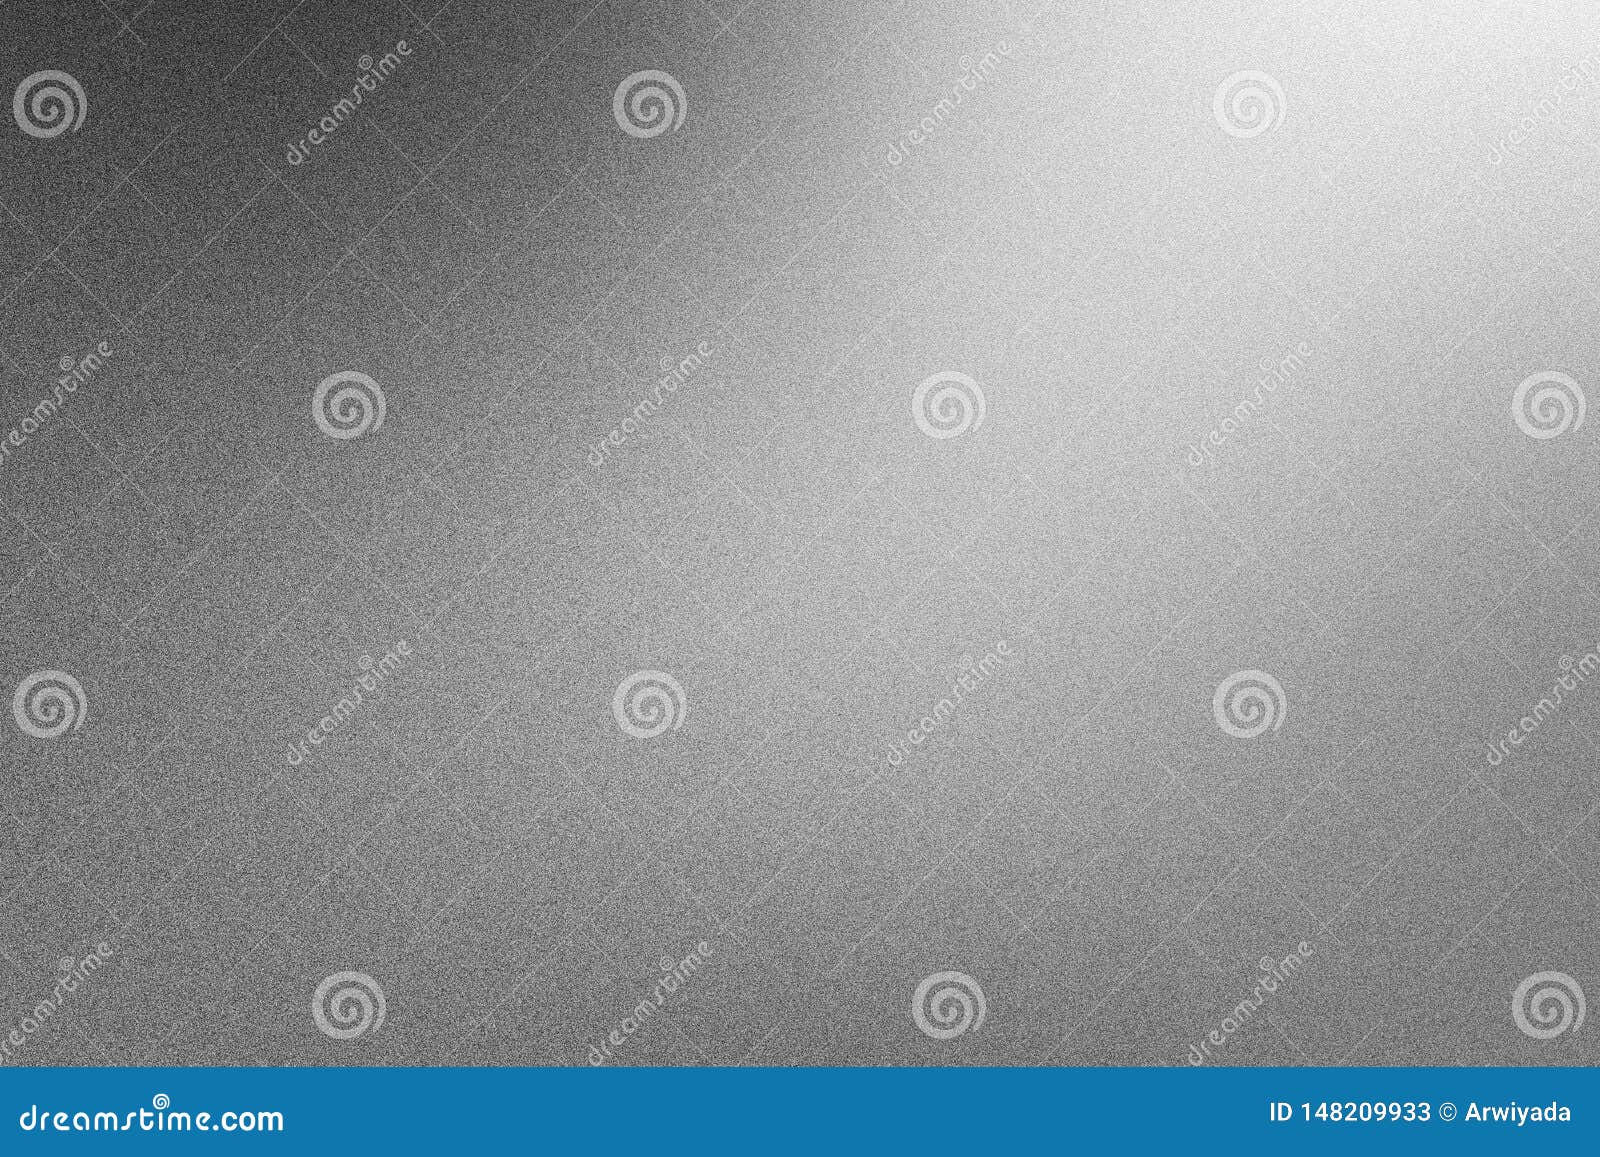 Silver Background Foil Texture Glass Stock Image - Image of colorful ...